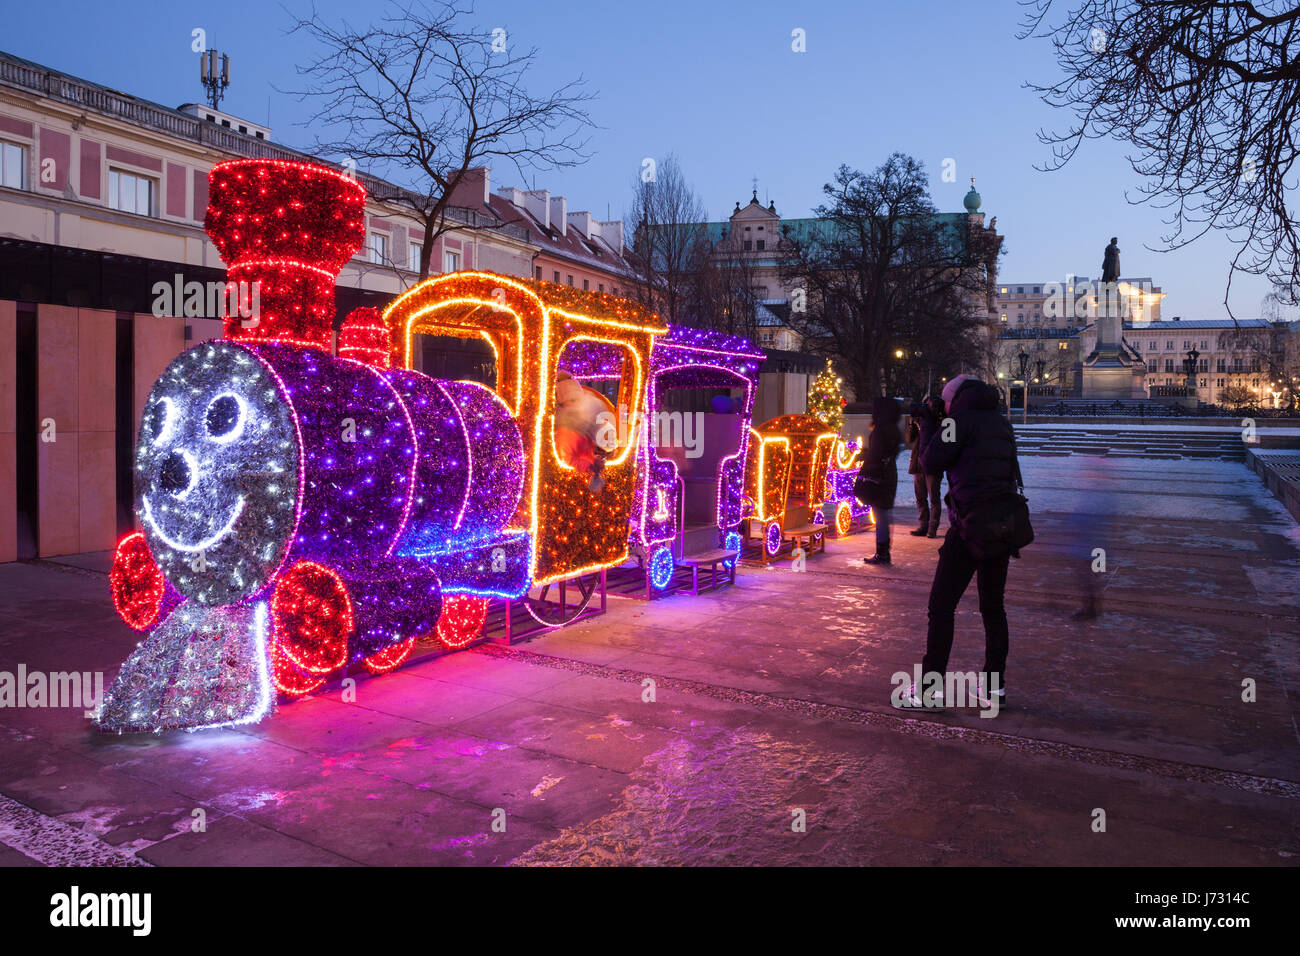 Locomotive and train christmas illumination at night on The Hoover Square in city of Warsaw, Poland, Europe Stock Photo